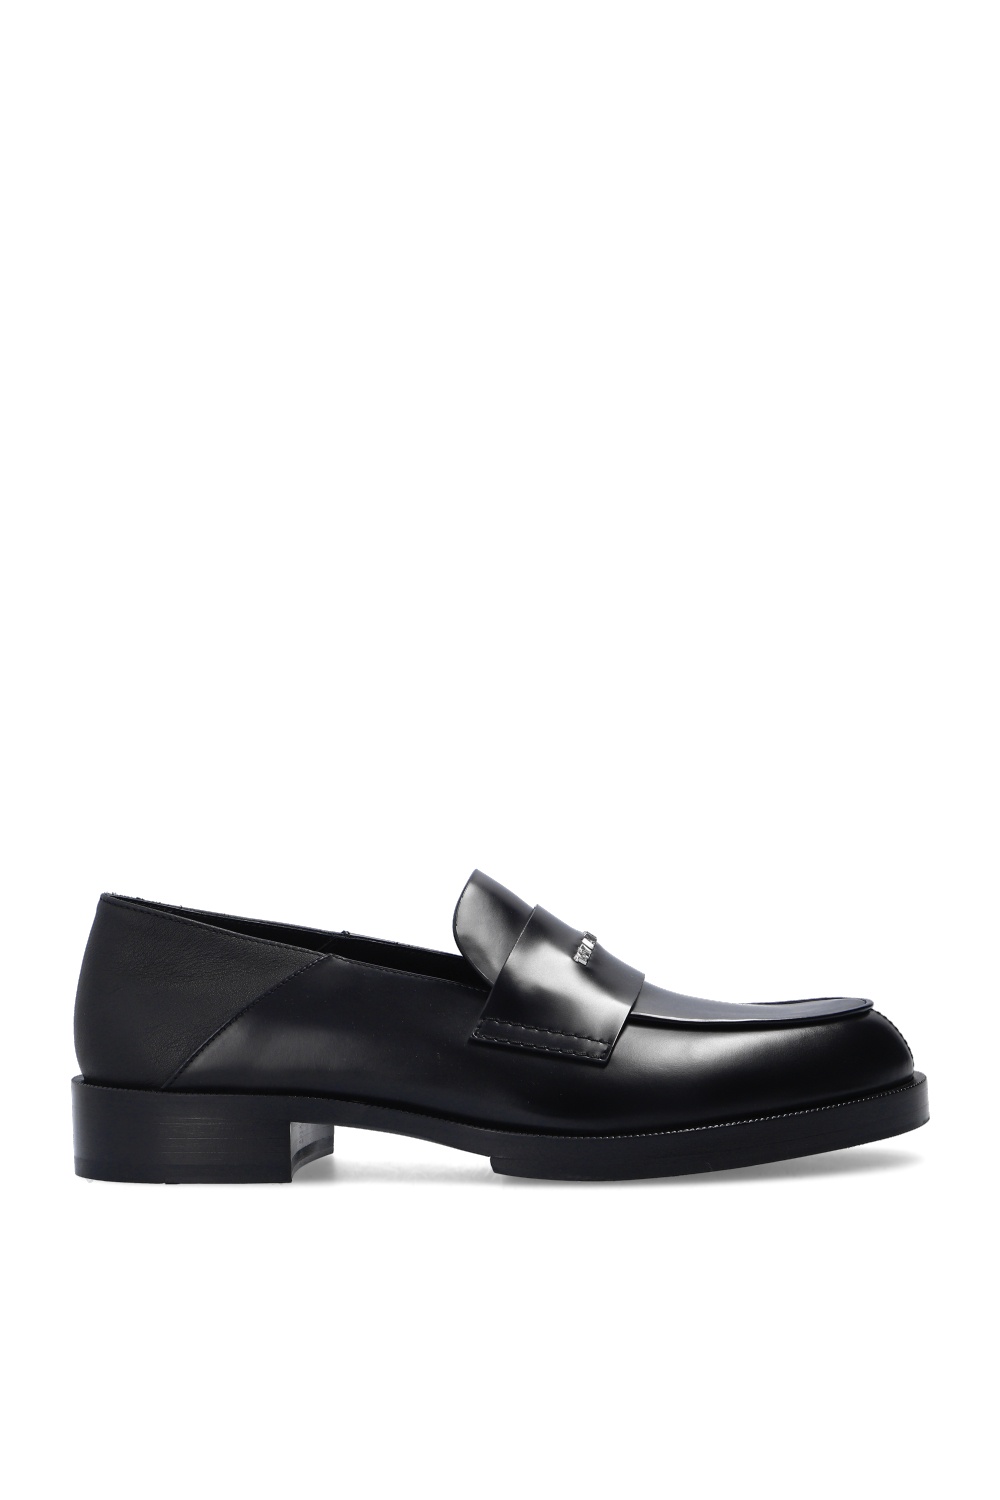 1017 ALYX 9SM Loafers with logo | Men's Shoes | Vitkac